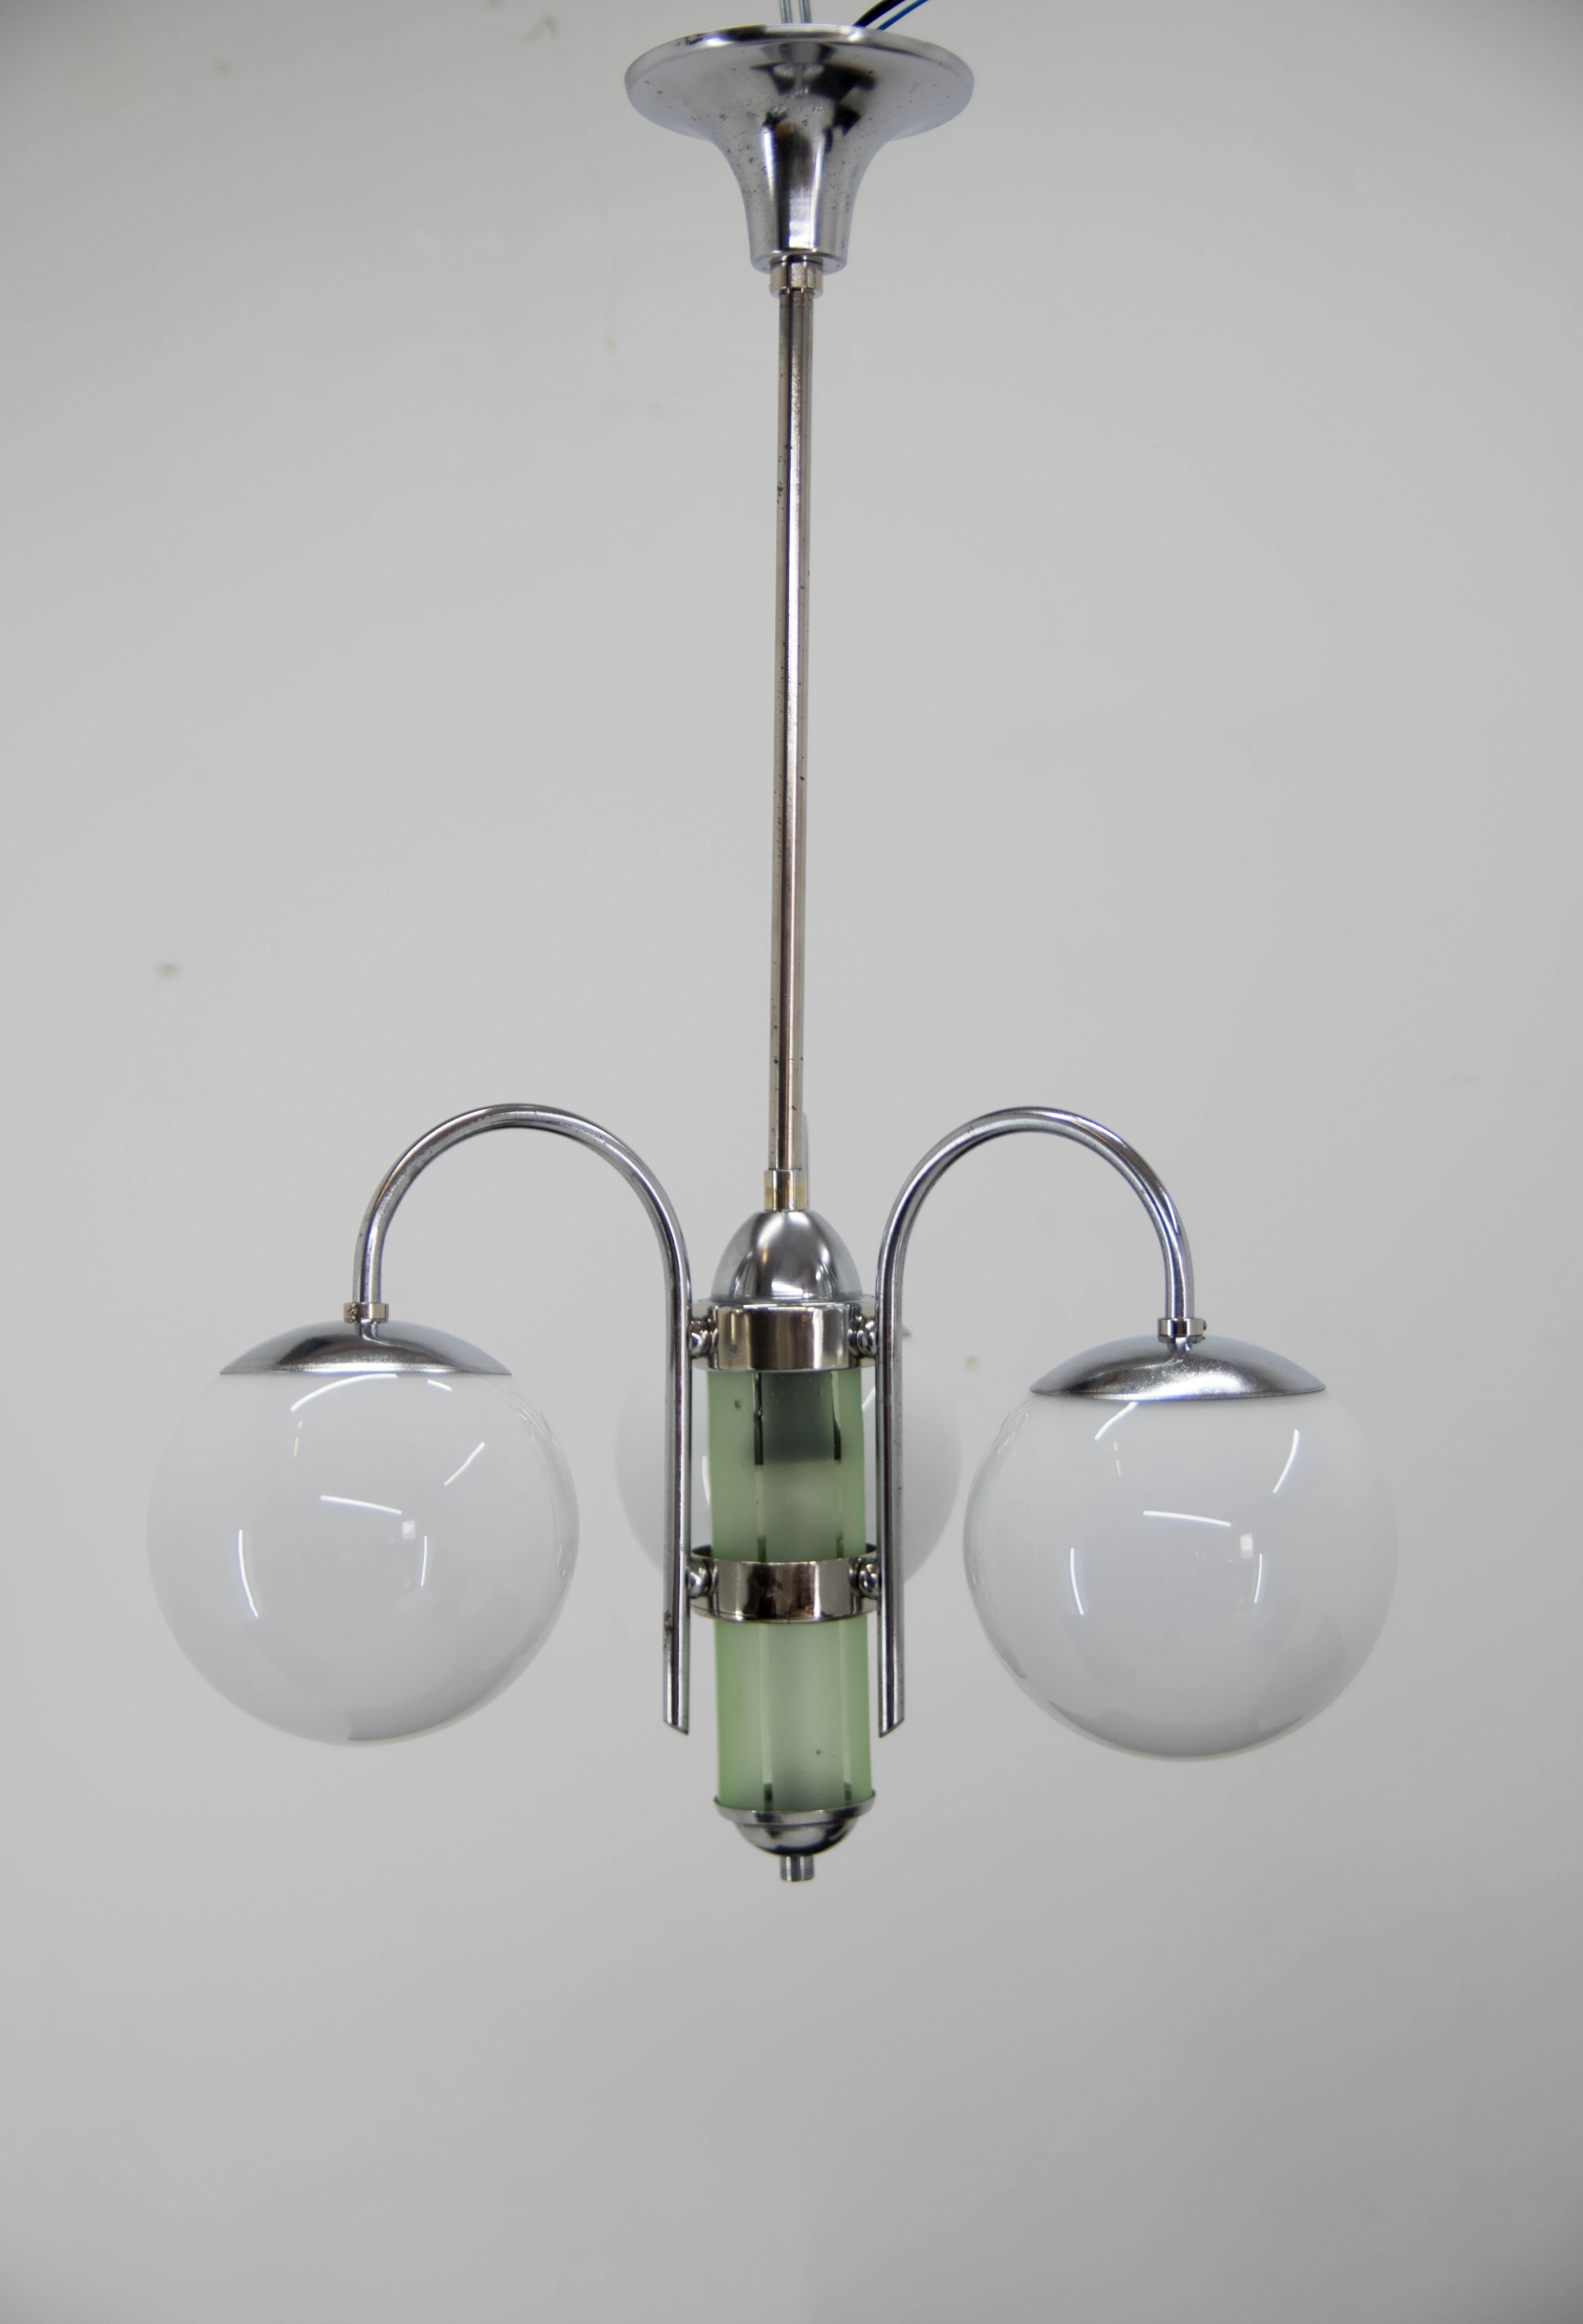 4-Flamming nickel-plated Art Deco chandelier. Restored: cleaned, polished, rewired: Two separate circuits: 1+3x40W, E25-E27 bulbs
US wiring compatible.